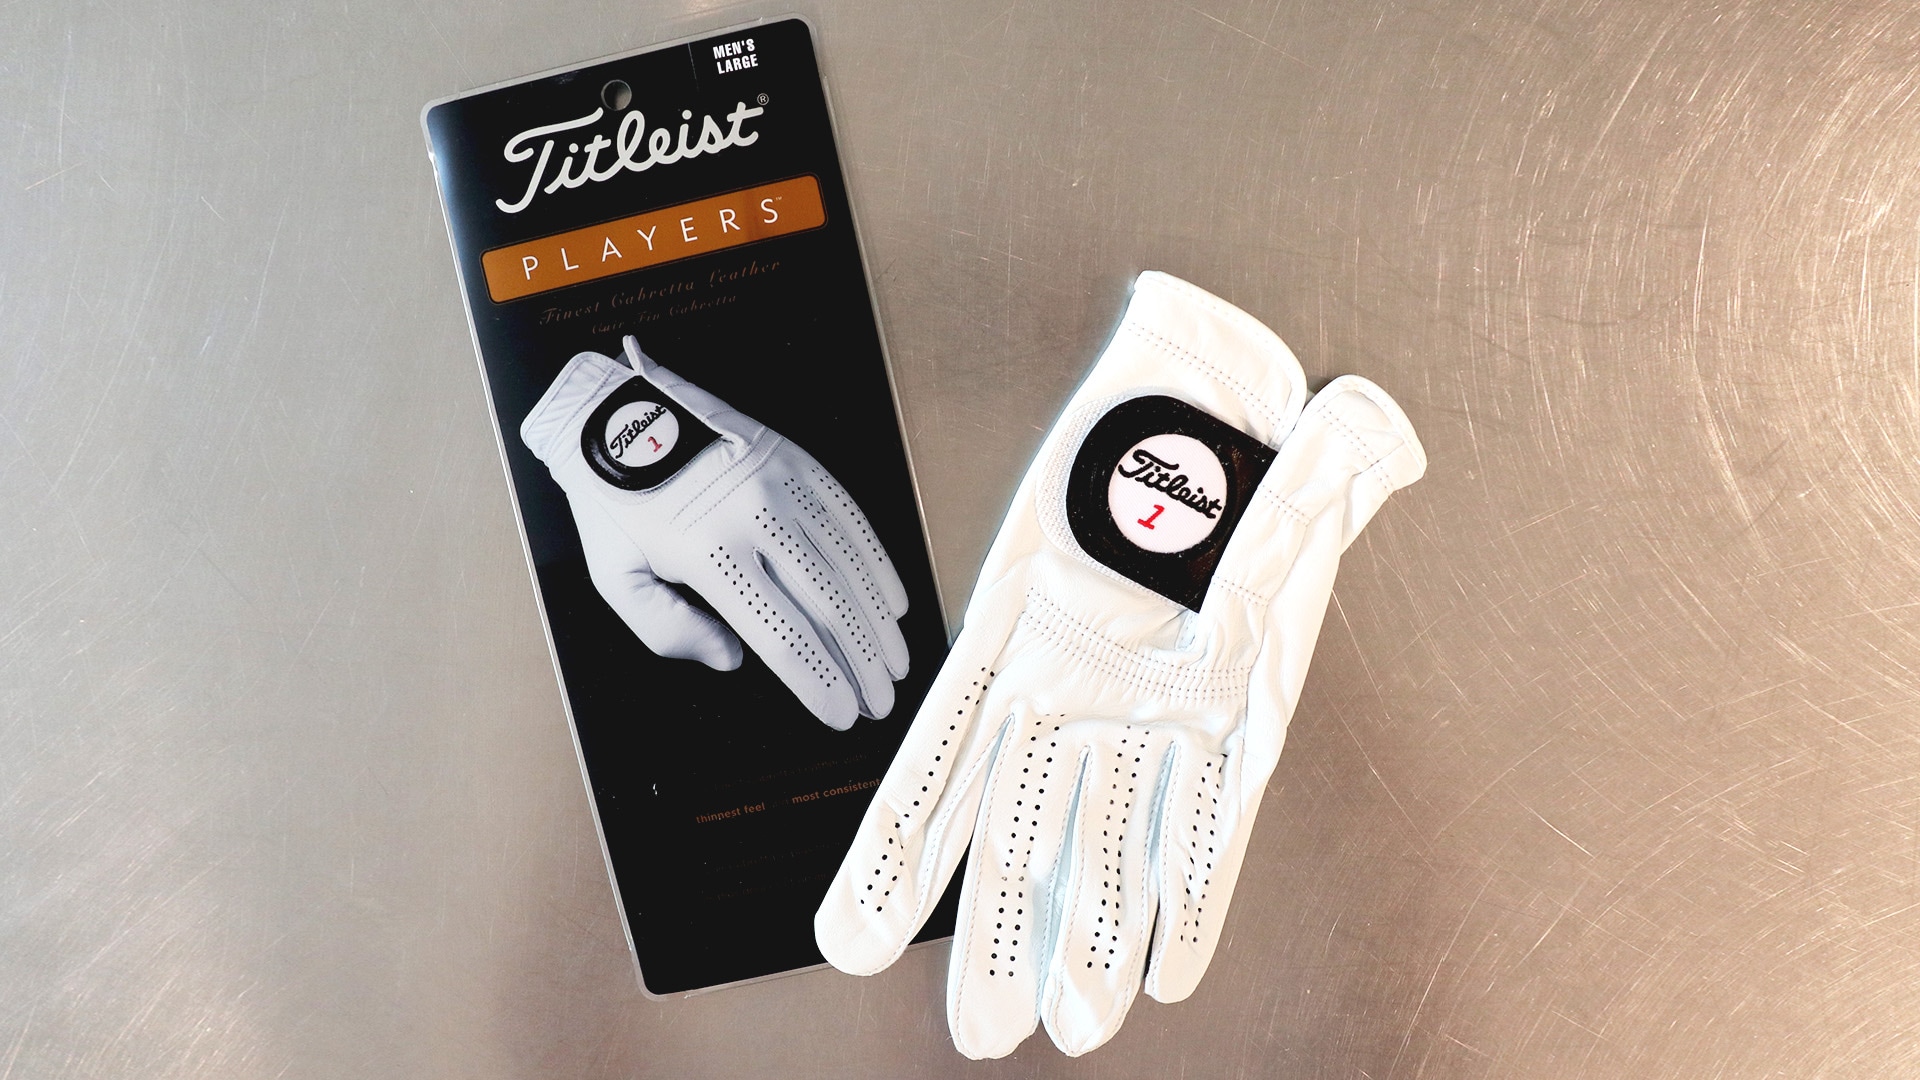 I carry 4-6 Titleist Players gloves and rotate...